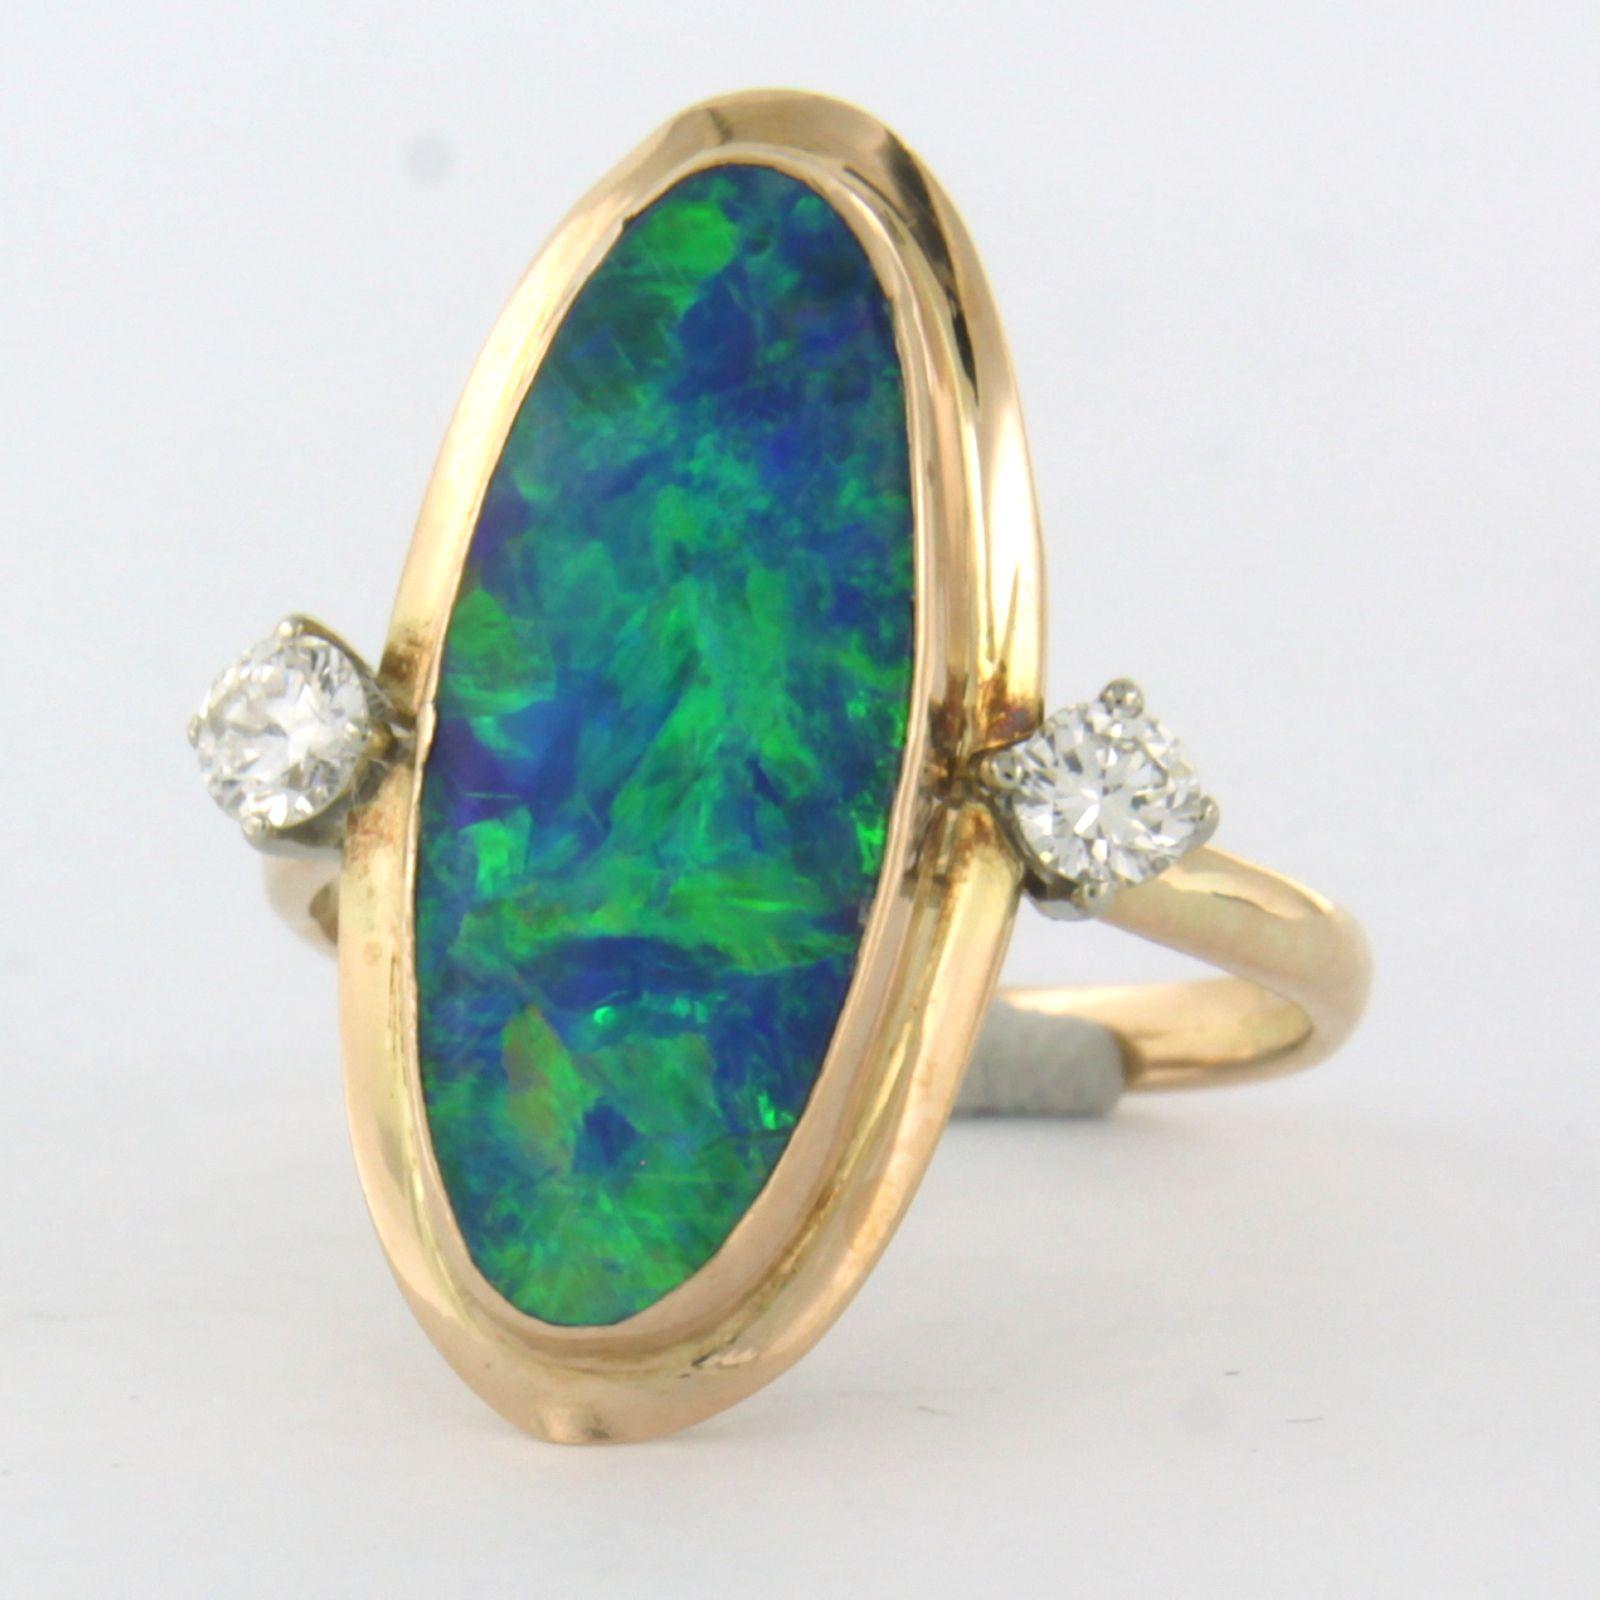 14 kt yellow gold ring set with opal and brilliant cut diamonds. 0.20 ct - F/G - VS/SI - ring size 5.25 (16/50)

Detailed description

the top of the ring is 2.2 cm wide

Ring size 5.25 (16/50), ring can be enlarged or reduced by a few sizes at cost